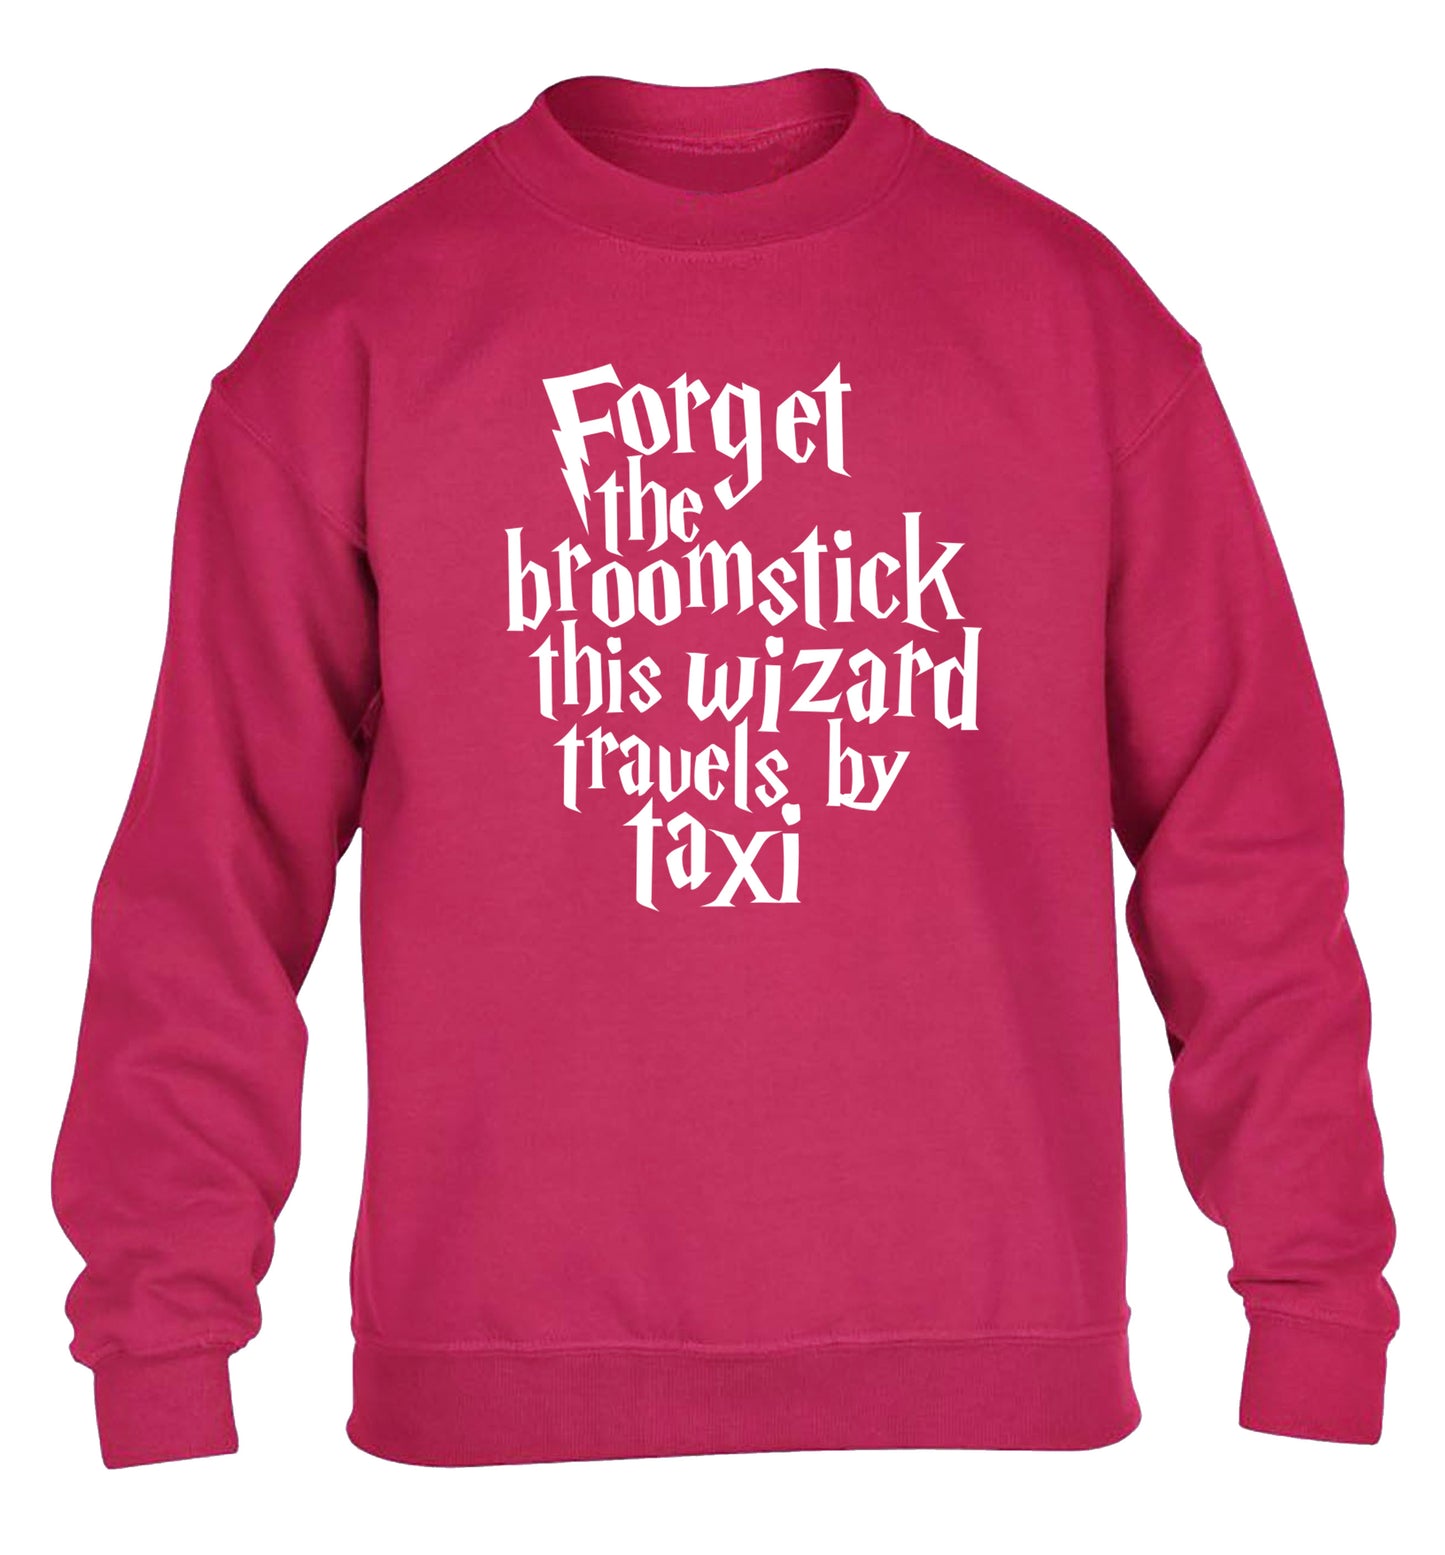 Forget the broomstick this wizard travels by taxi children's pink sweater 12-14 Years